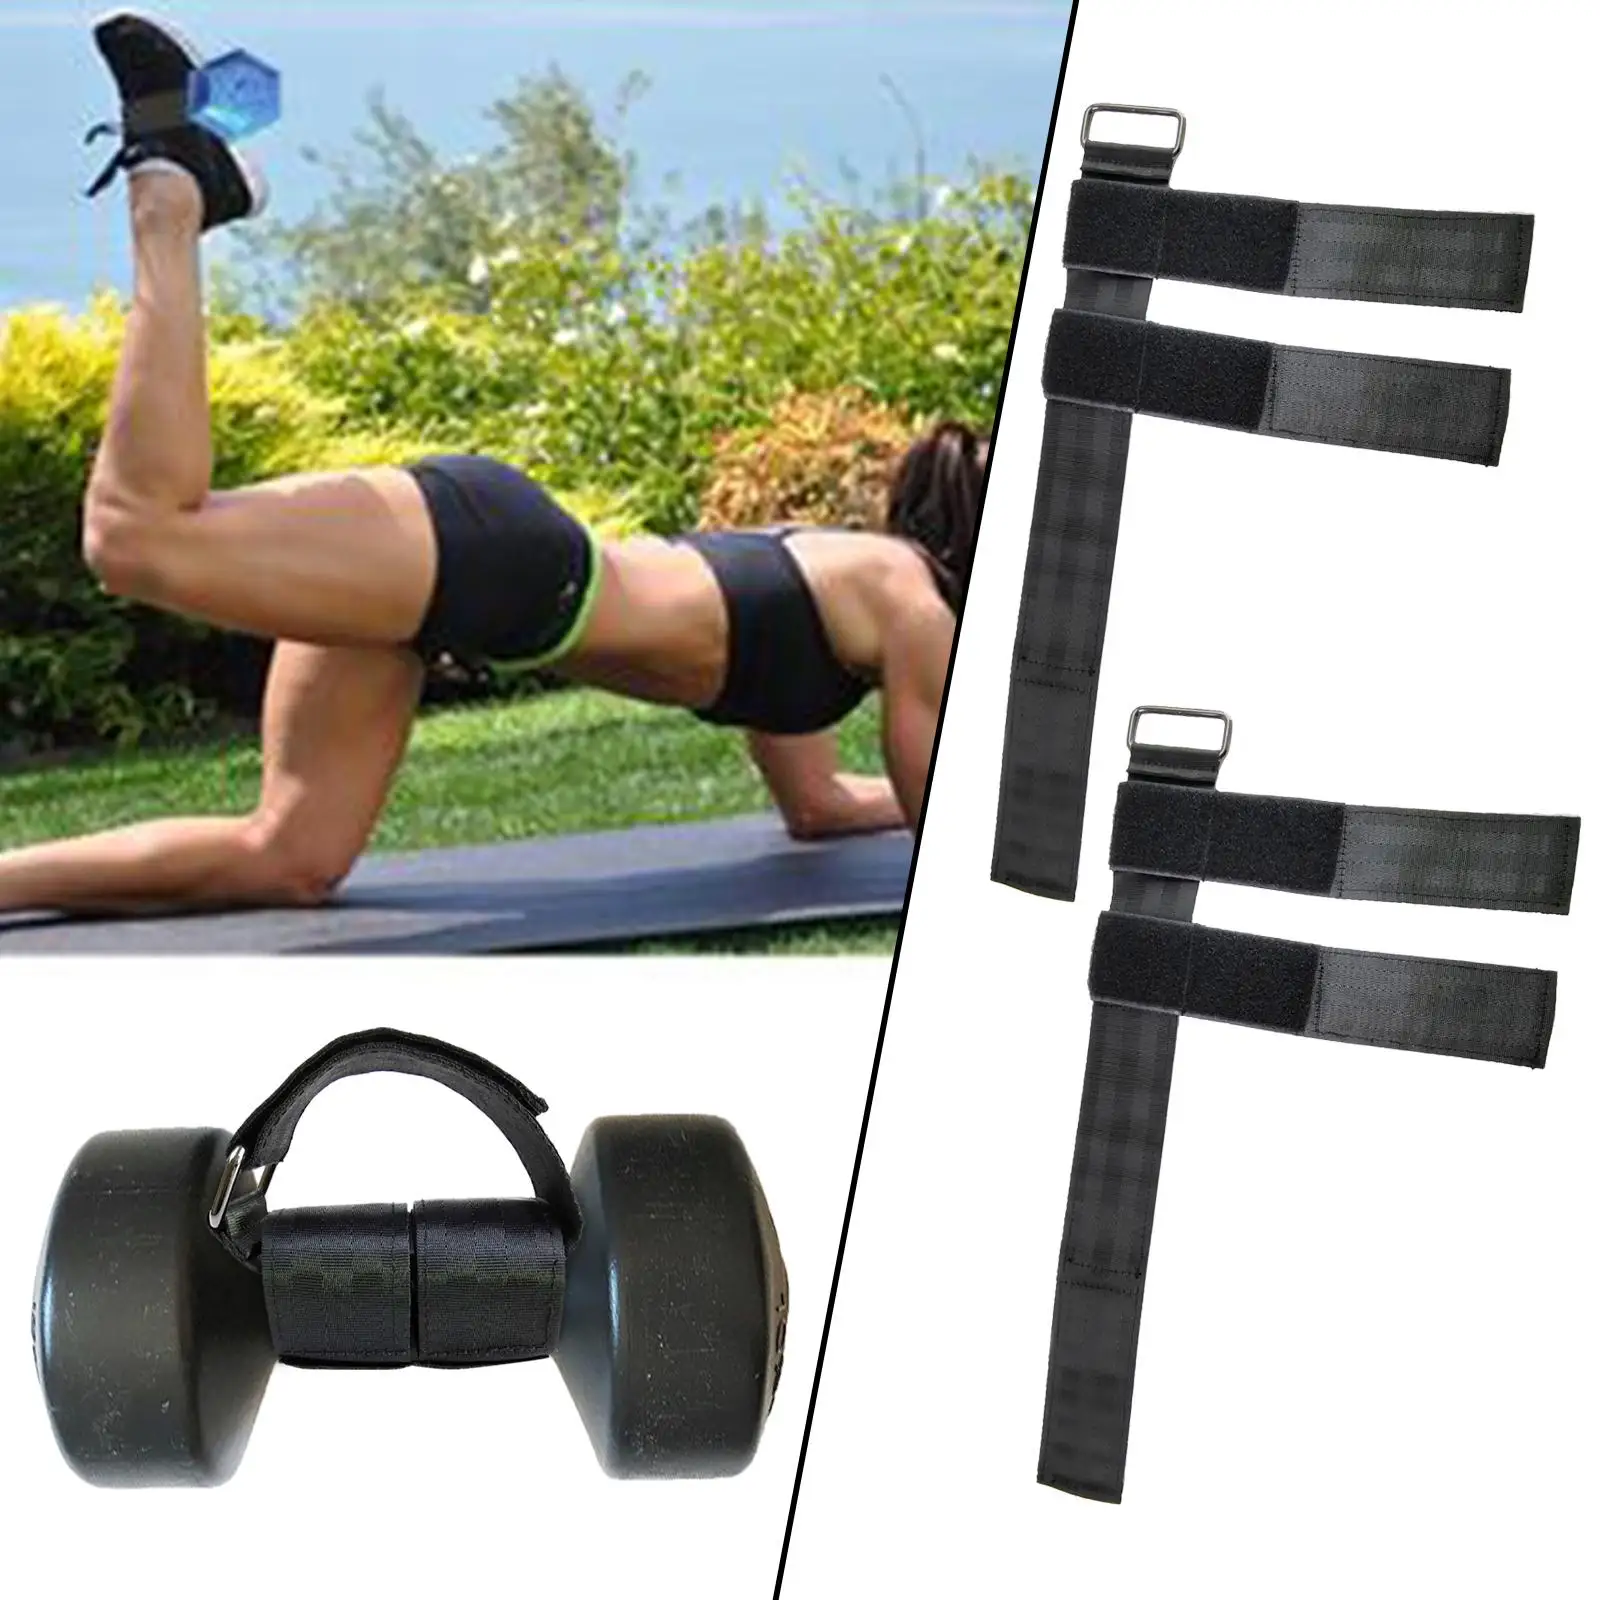 2Pcs D Ring Ankle Glute Workouts for Power Training Equipment